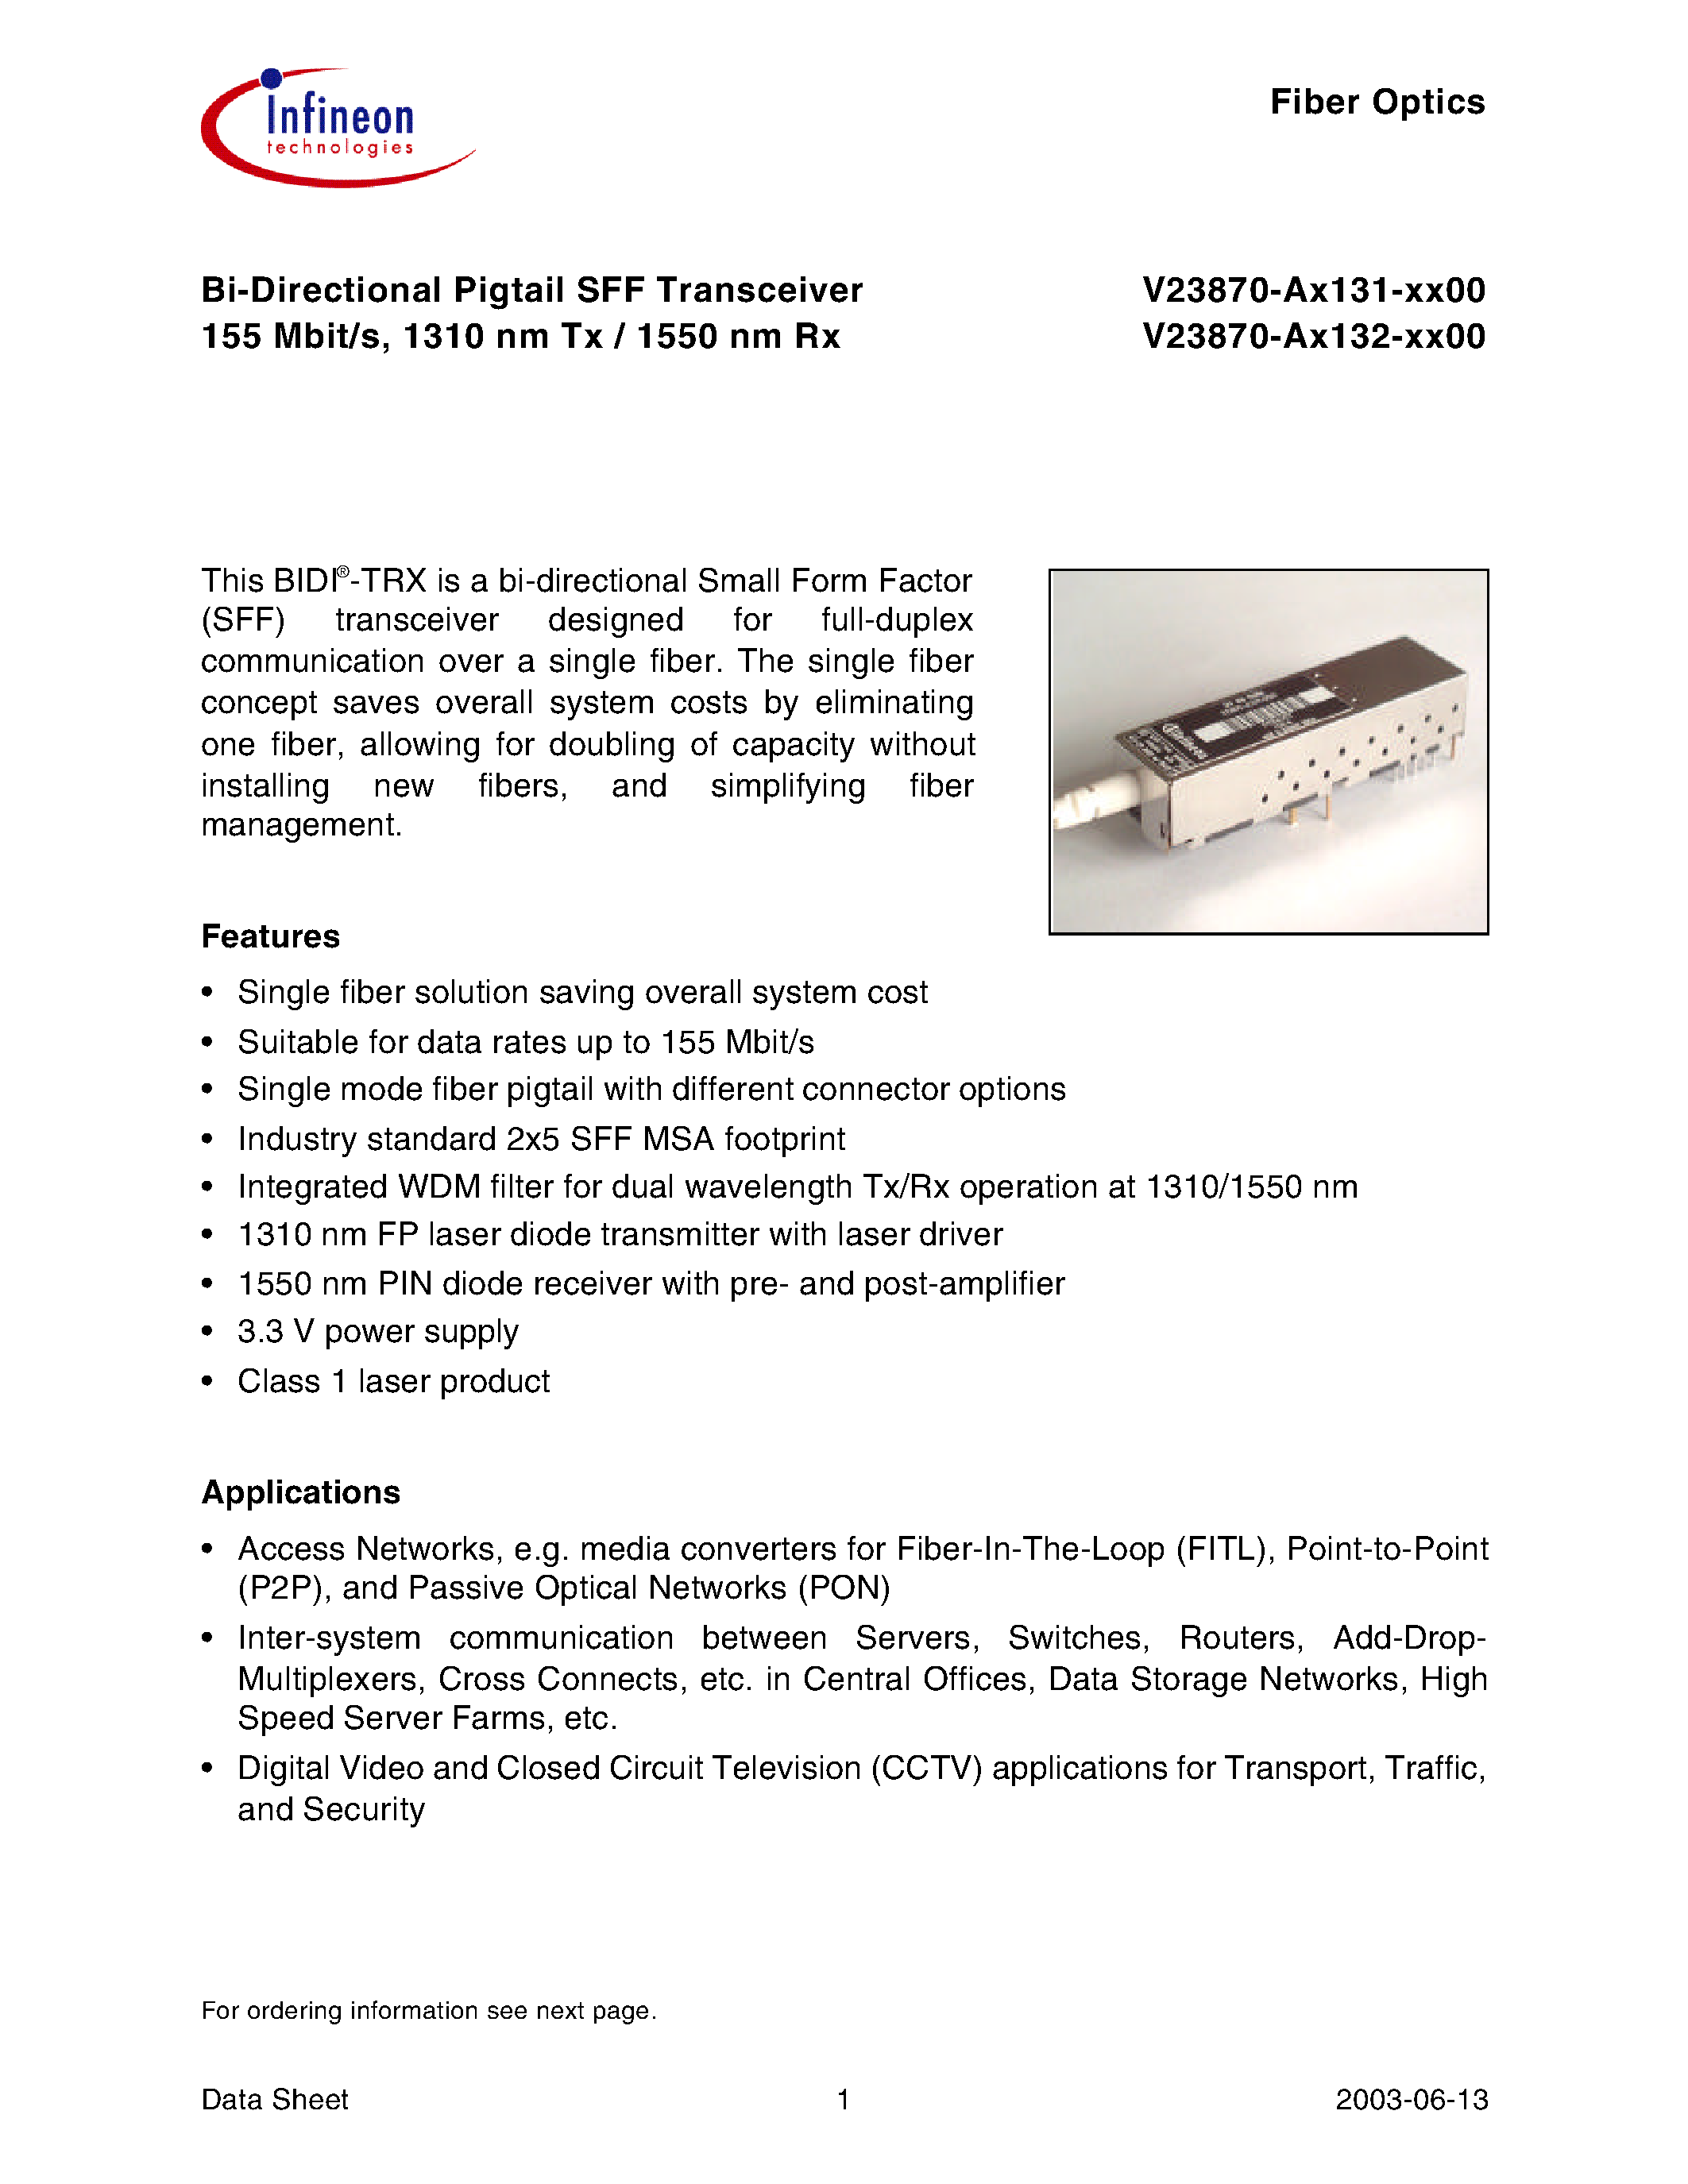 Datasheet V23870-A3131-B600 - Bi-Directional Pigtail SFF Transceiver 155 Mbit/s/ 1310 nm Tx / 1550 nm Rx page 1